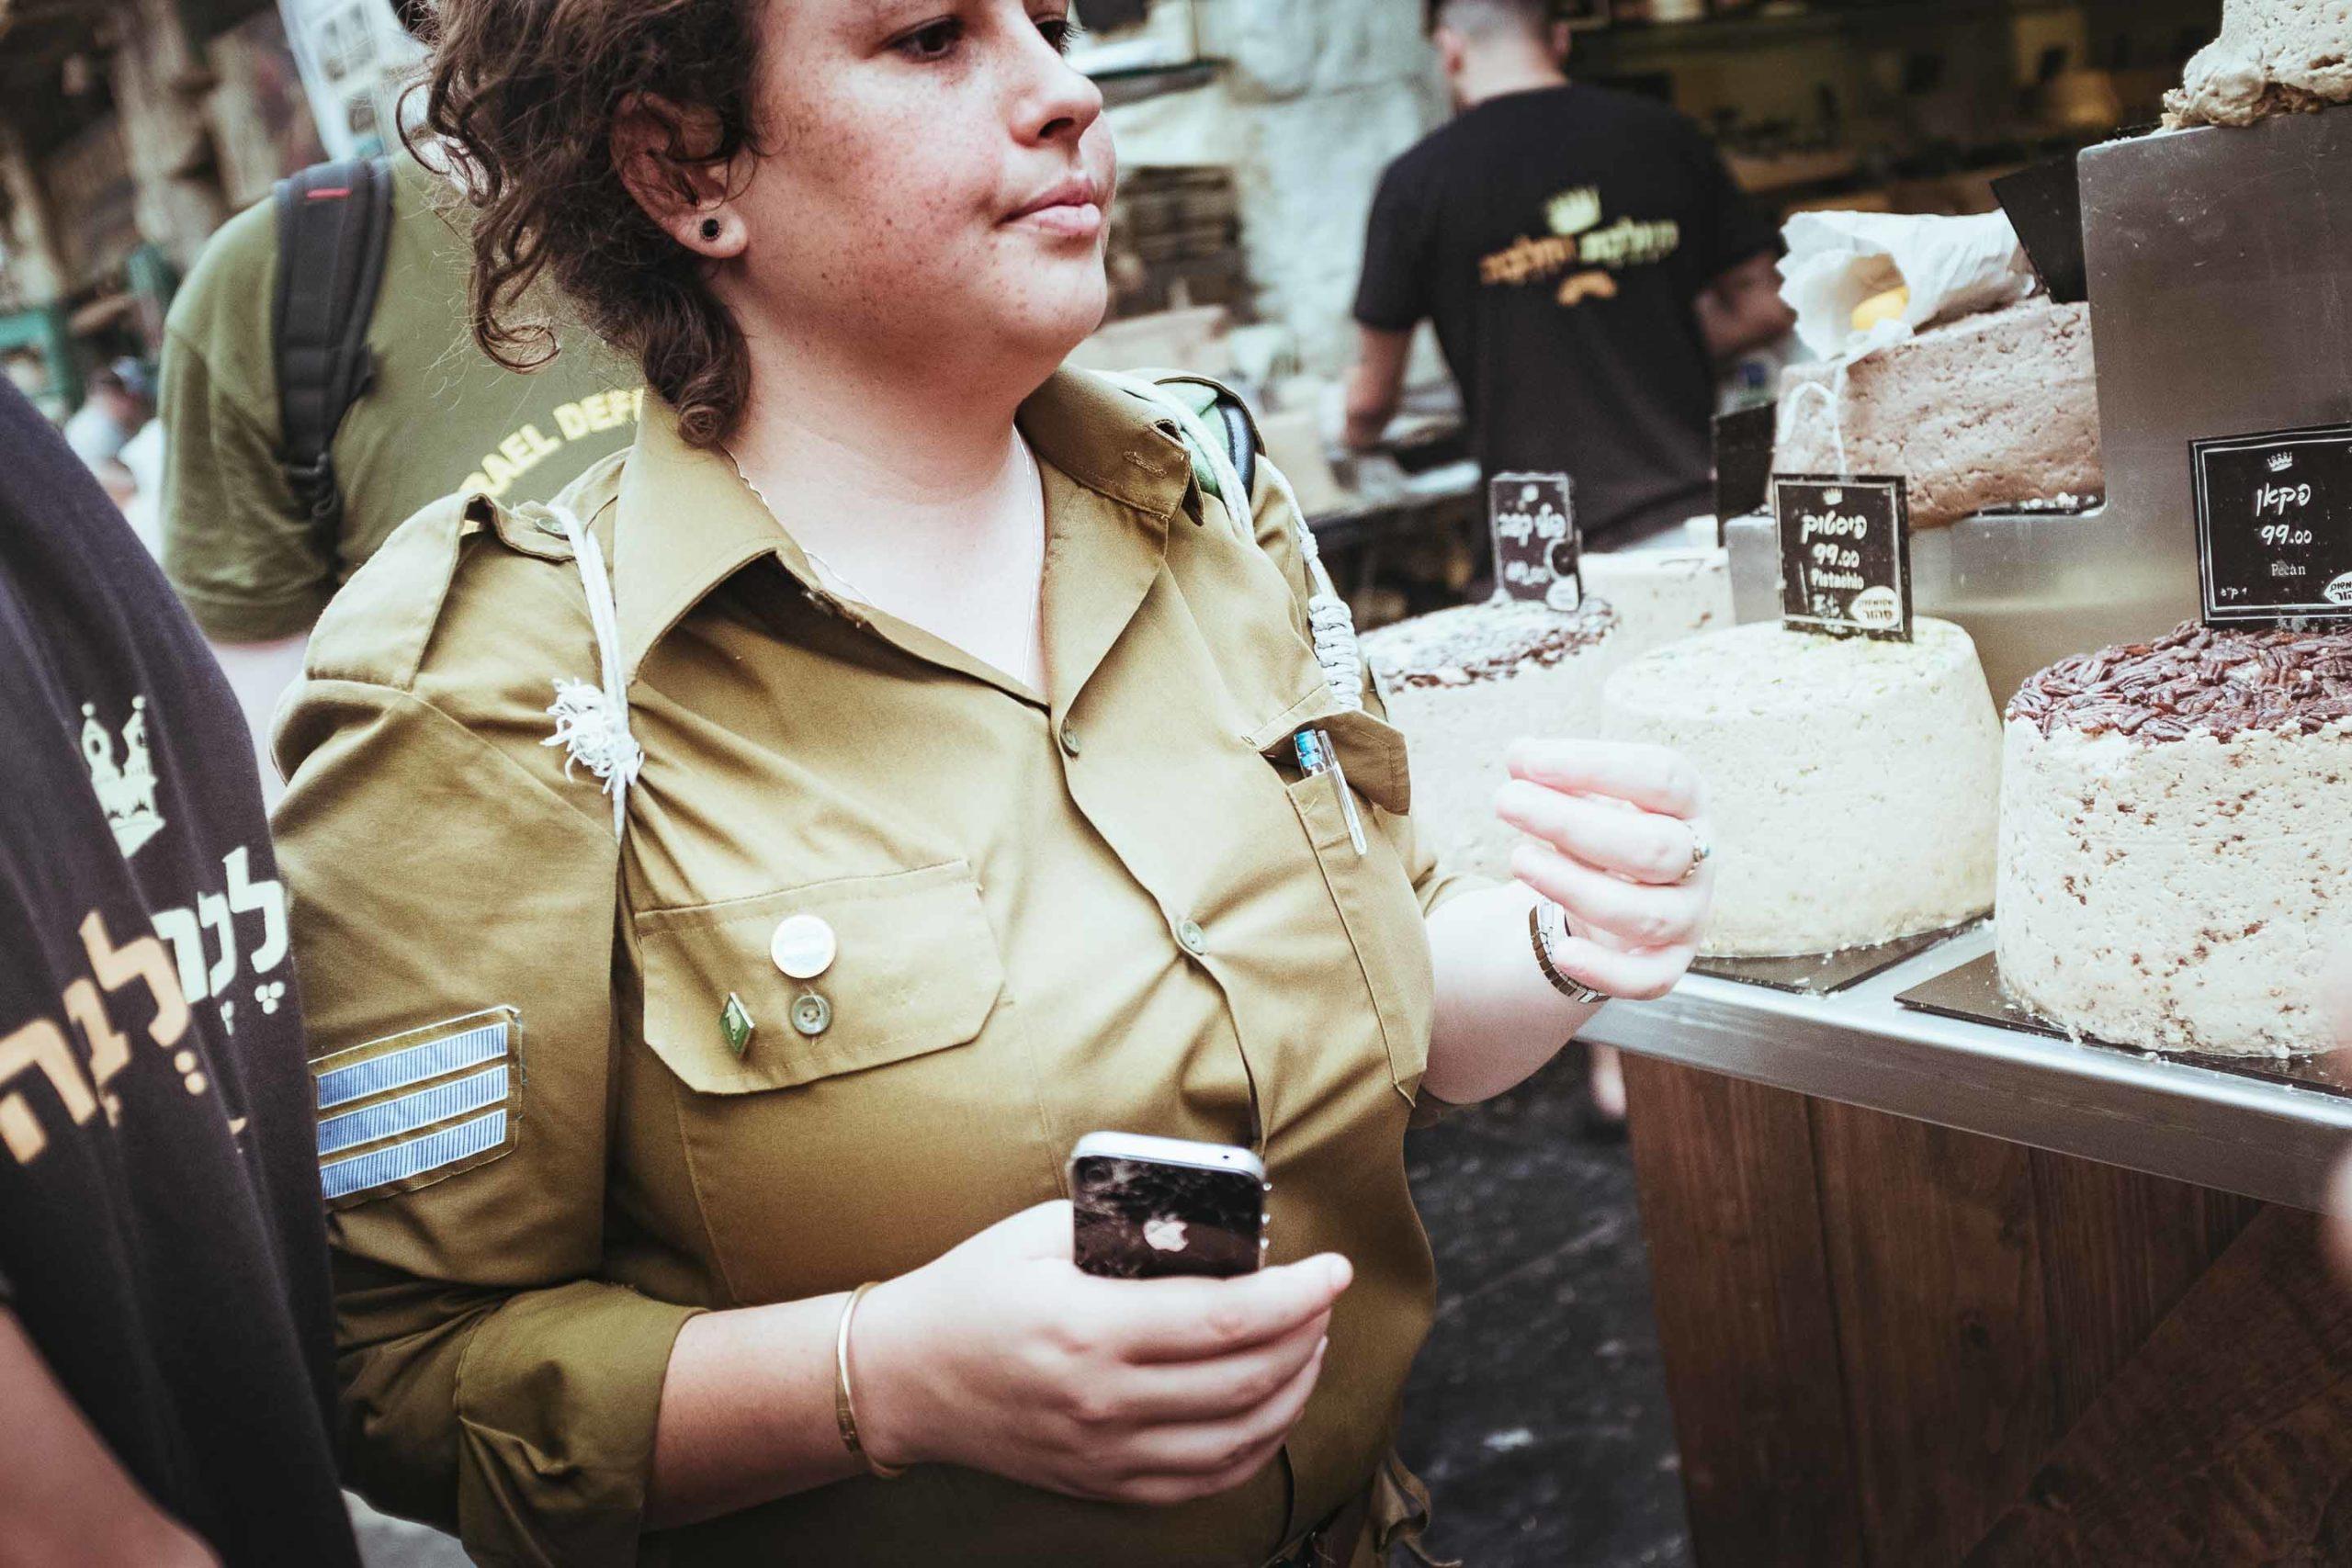 This image shows one of a series of photos taken at Mahane Yehuda Market in Jerusalem.